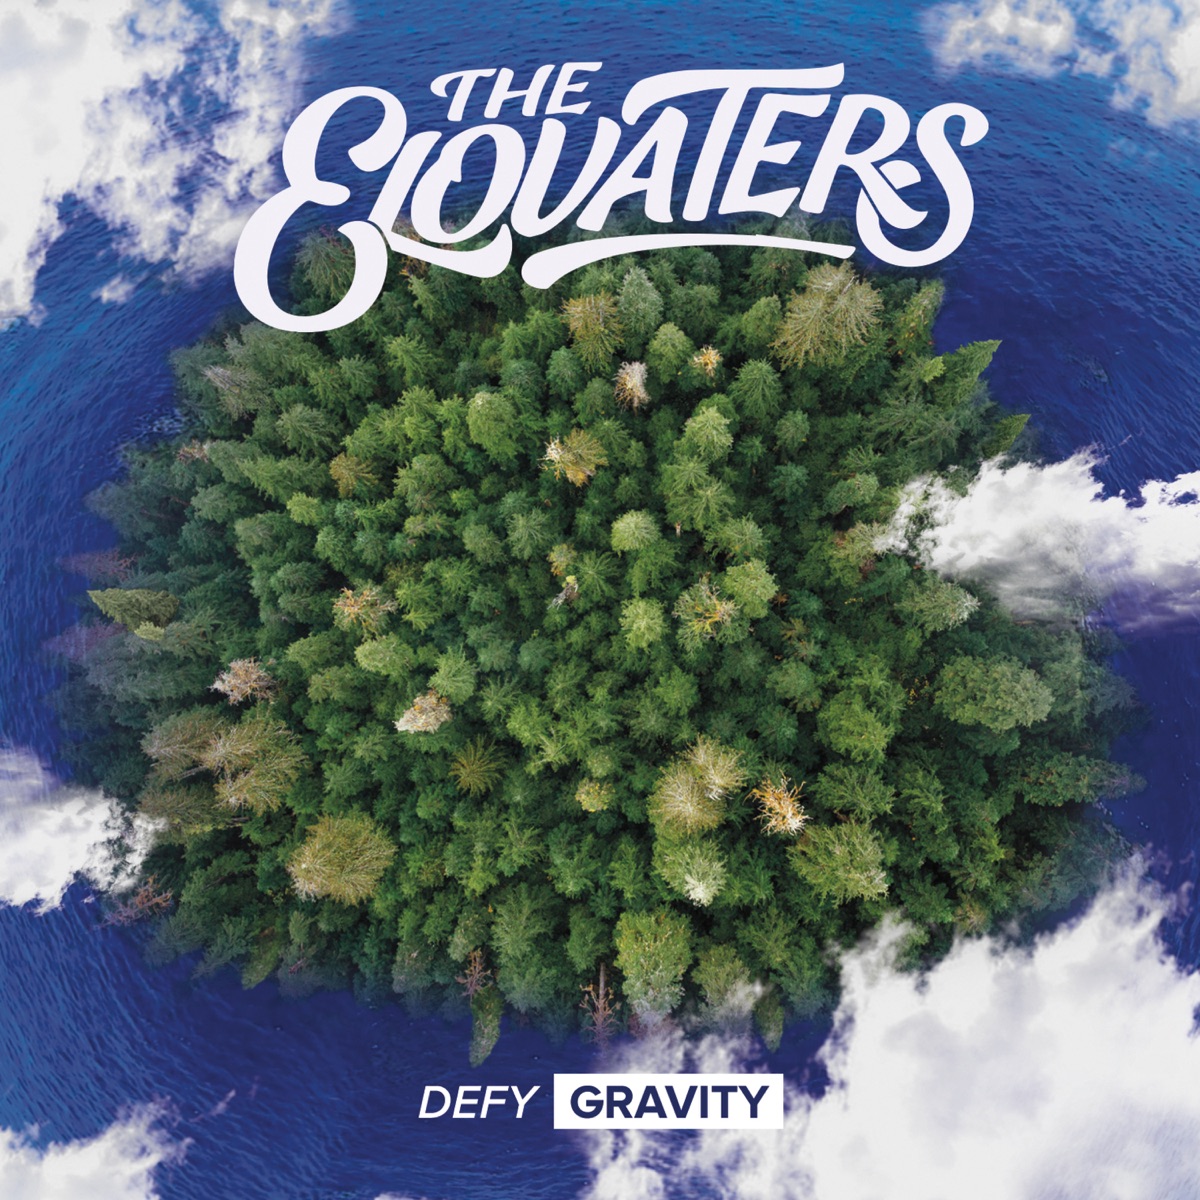 Defy Gravity - Album by The Elovaters - Apple Music